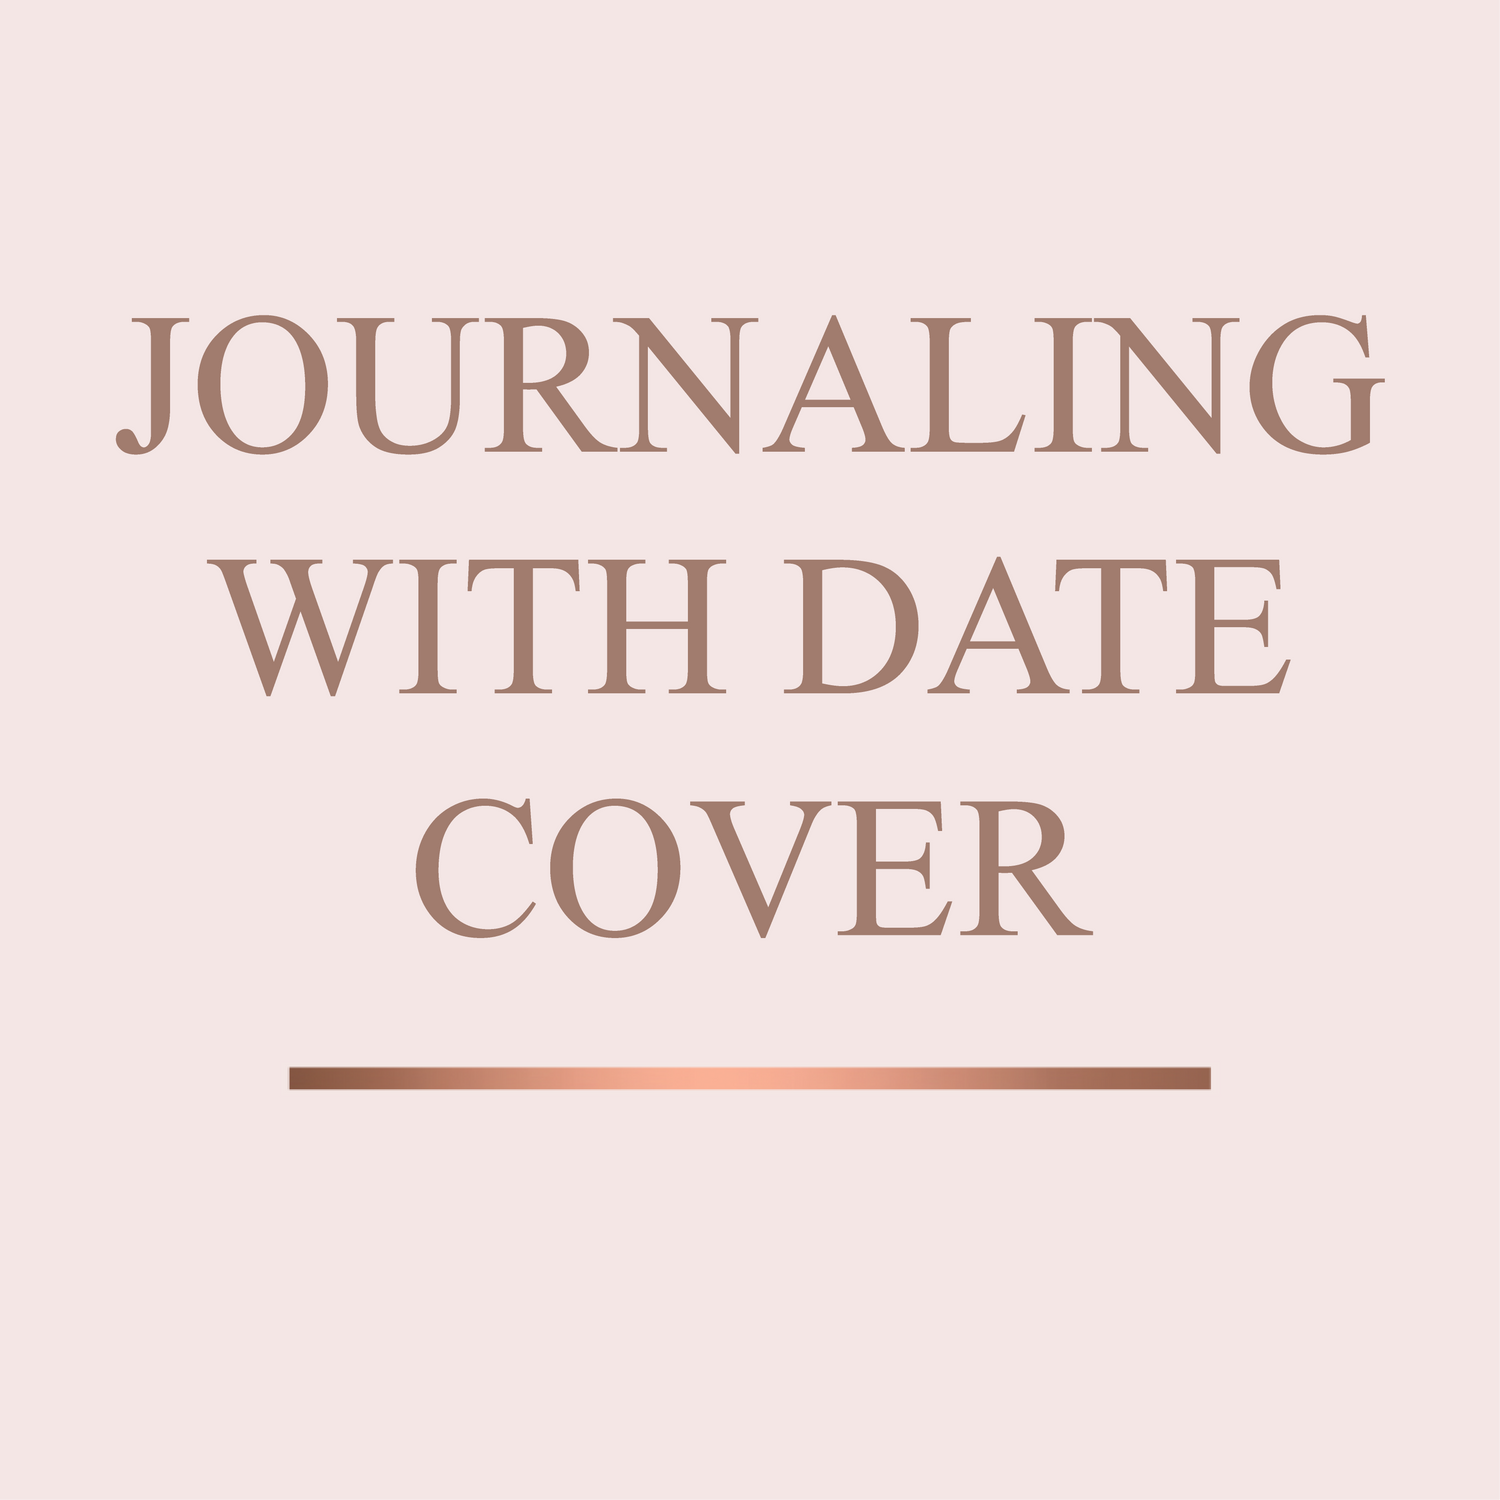 Journaling with Date Covers